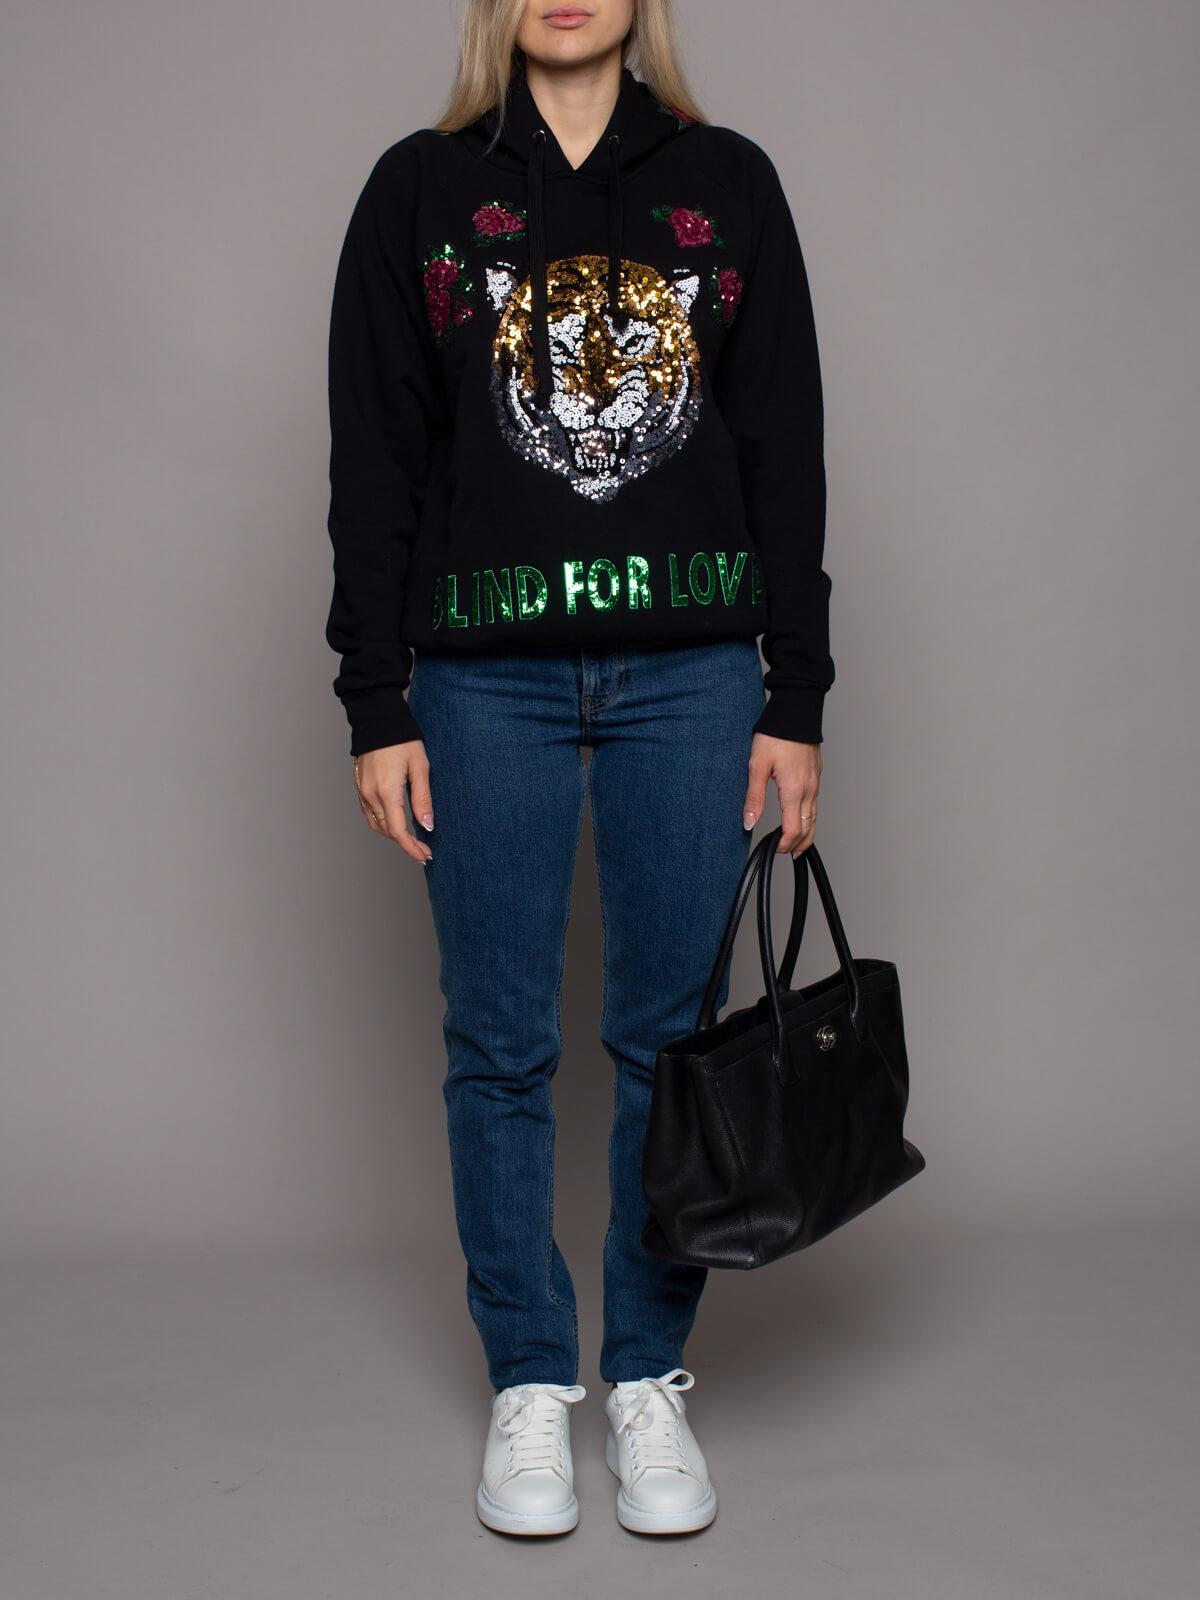 CONDITION is very good, minor stains are evident on the garment Details Black Embellished tiger Long sleeves Hoodie Made in Italy Composition 100% Cotton Fitting Information True to size Bust: 48 cm 18. 9 in Length: 54 cm 21. 3 in Model Measurements